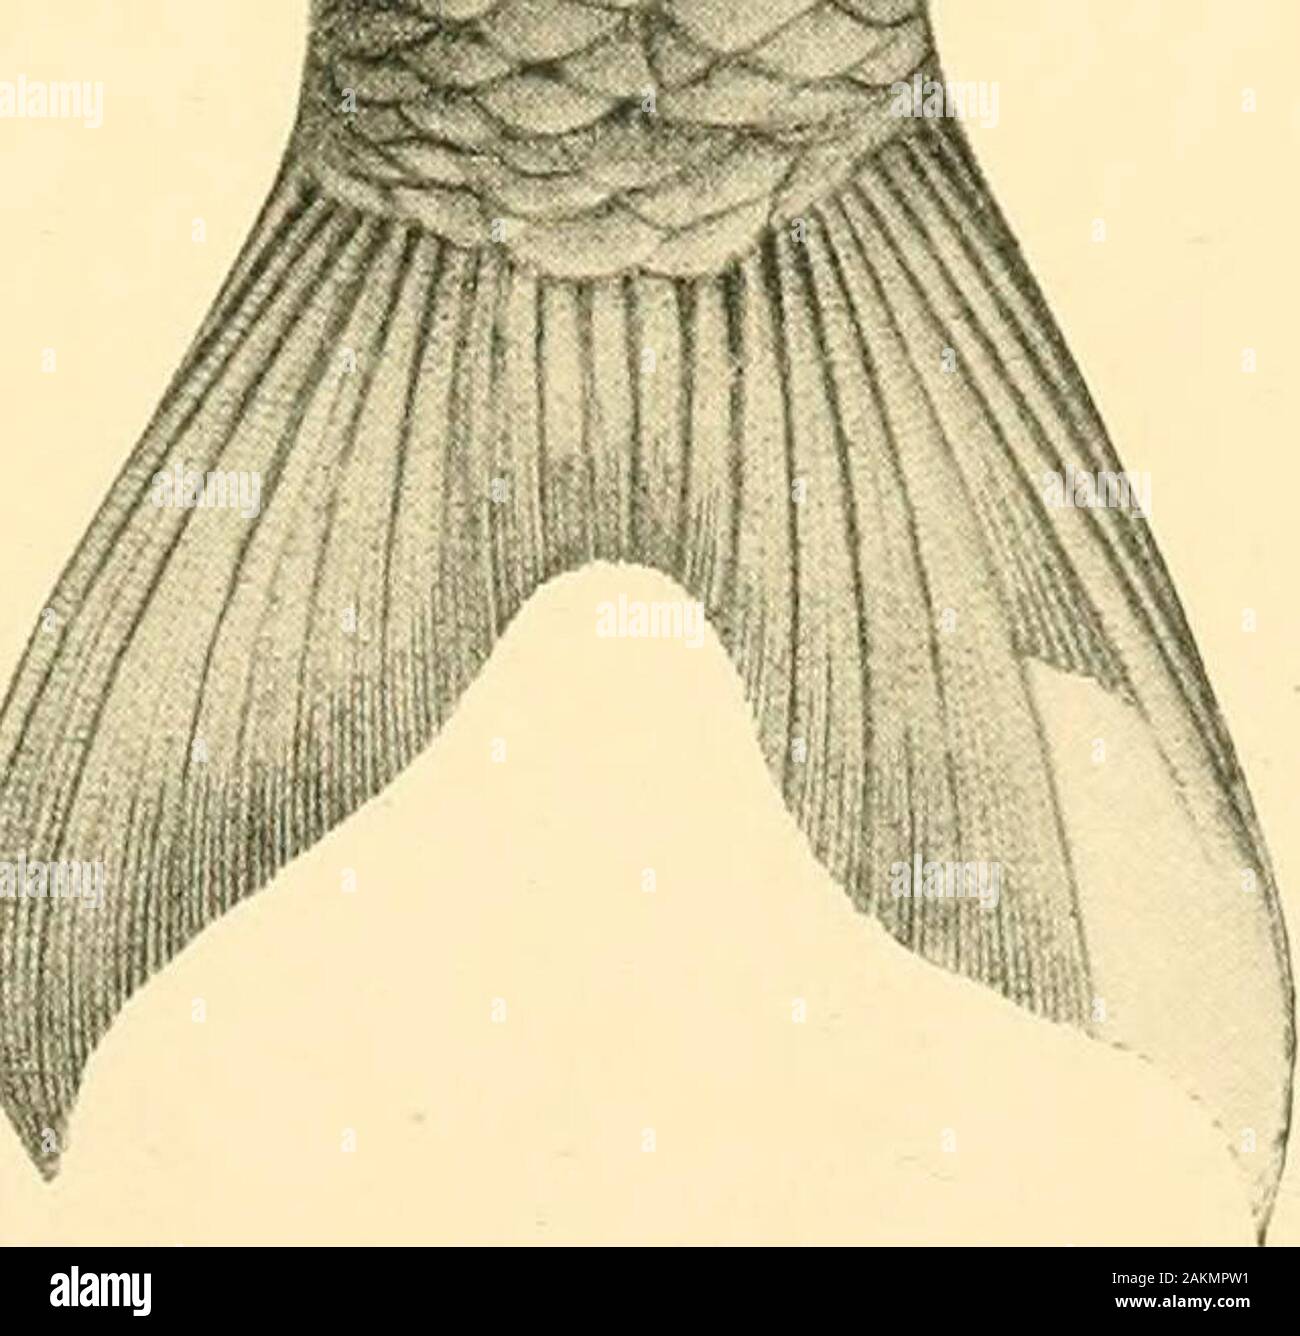 The Tanganyika problem; an account of the researches undertaken concerning the existence of marine animals in Central Africa . 158 THE TANGANYIKA PROBLEM. 10. Barbus serrifer.—Blgr. 1900. (Fig., p. 207, lower.) Depth of body 3 to 3.} times in total length, length of head 4 to 4.3 times. Snoutrounded, not projecting beyond the lower jaw, as long as or a little longer than thediameter of the eye, which is contained 4 to 4^ times in the length of the headand 1  to h times in the interocular width ; mouth small, with two pairs ofbarbels, the posterior of which are the longer, and measure twice t Stock Photo